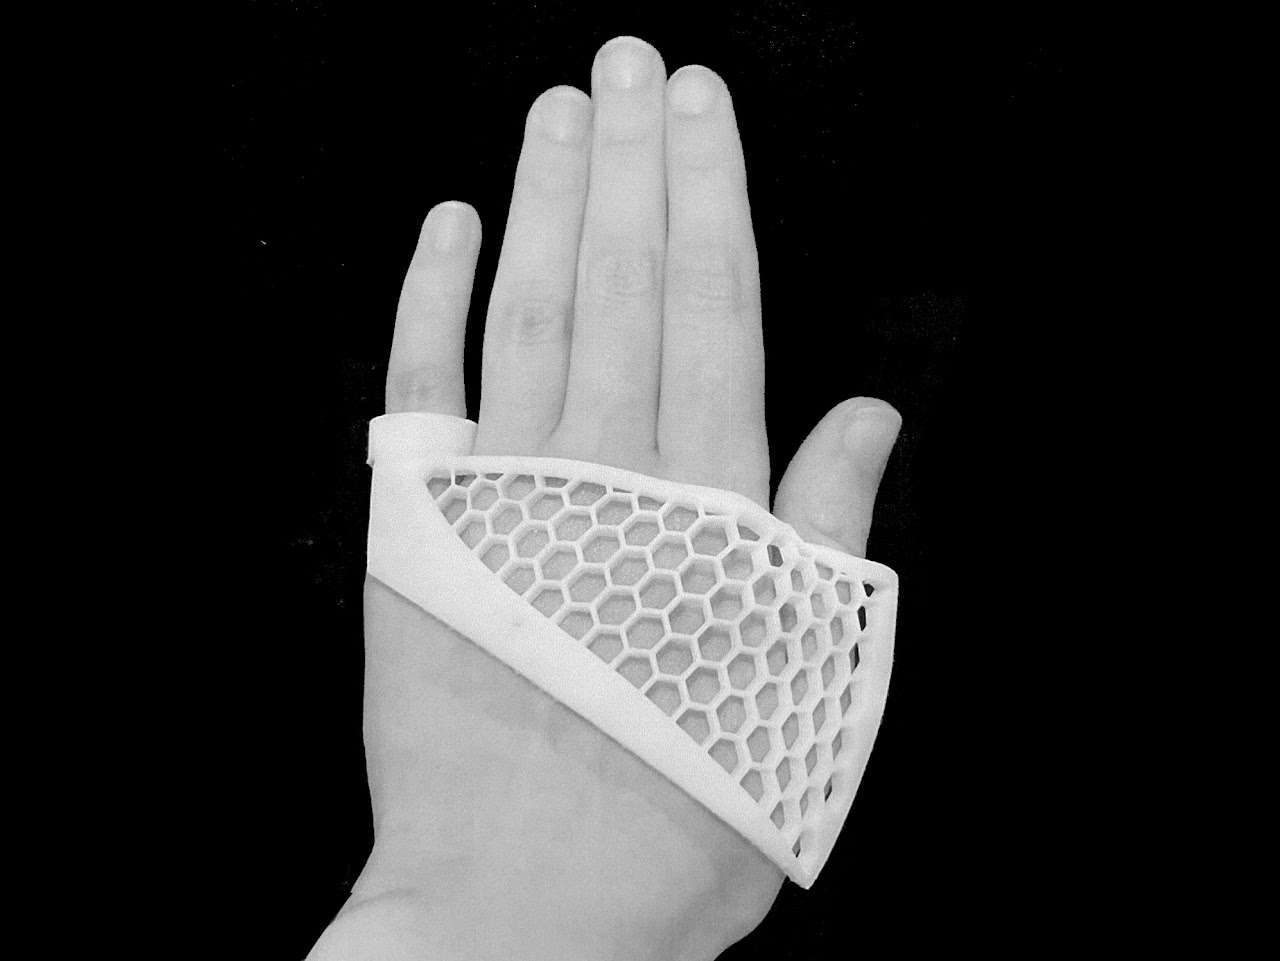 3d printed object on the back of a hand with a honey comb pattern